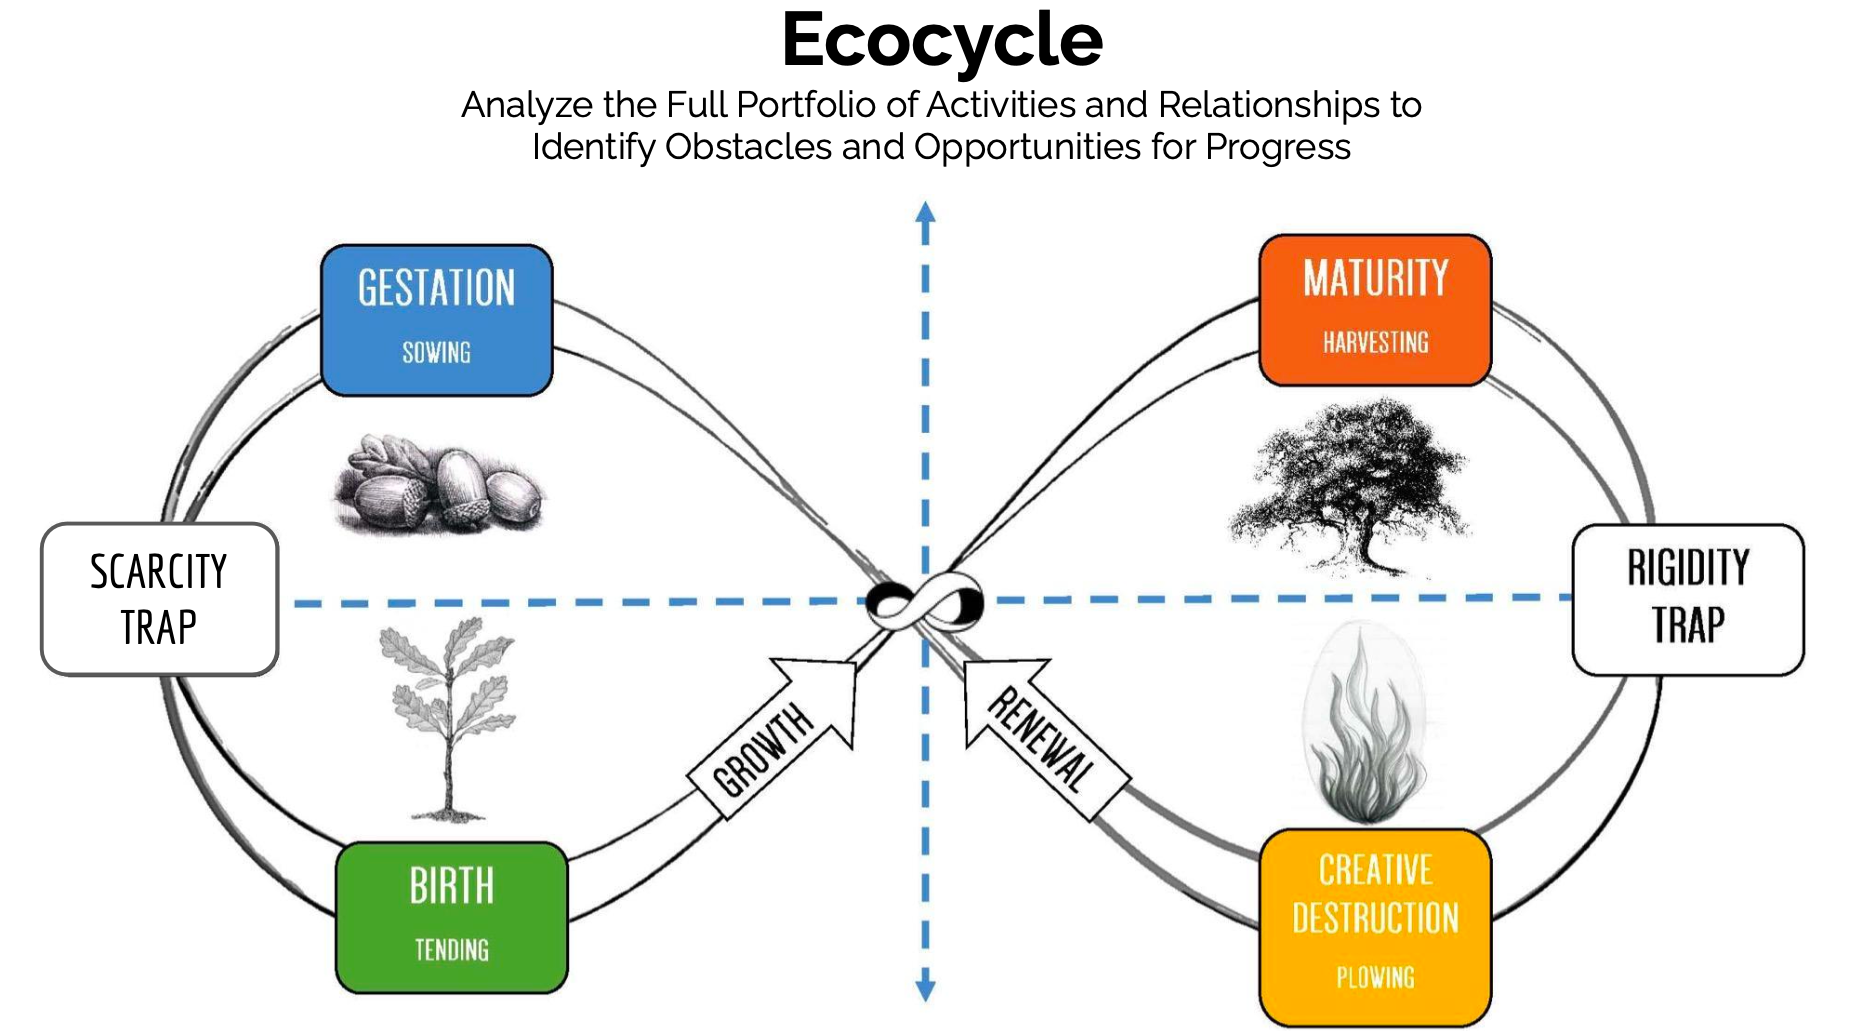 An eco cycle planning template, showing a figure-eight loop from birth, through maturity, to creative destruction, and back to gestation. At each state there is a drawing of a tree growing from an acorn into a large tree and then being harvested or burned at the end of its life.